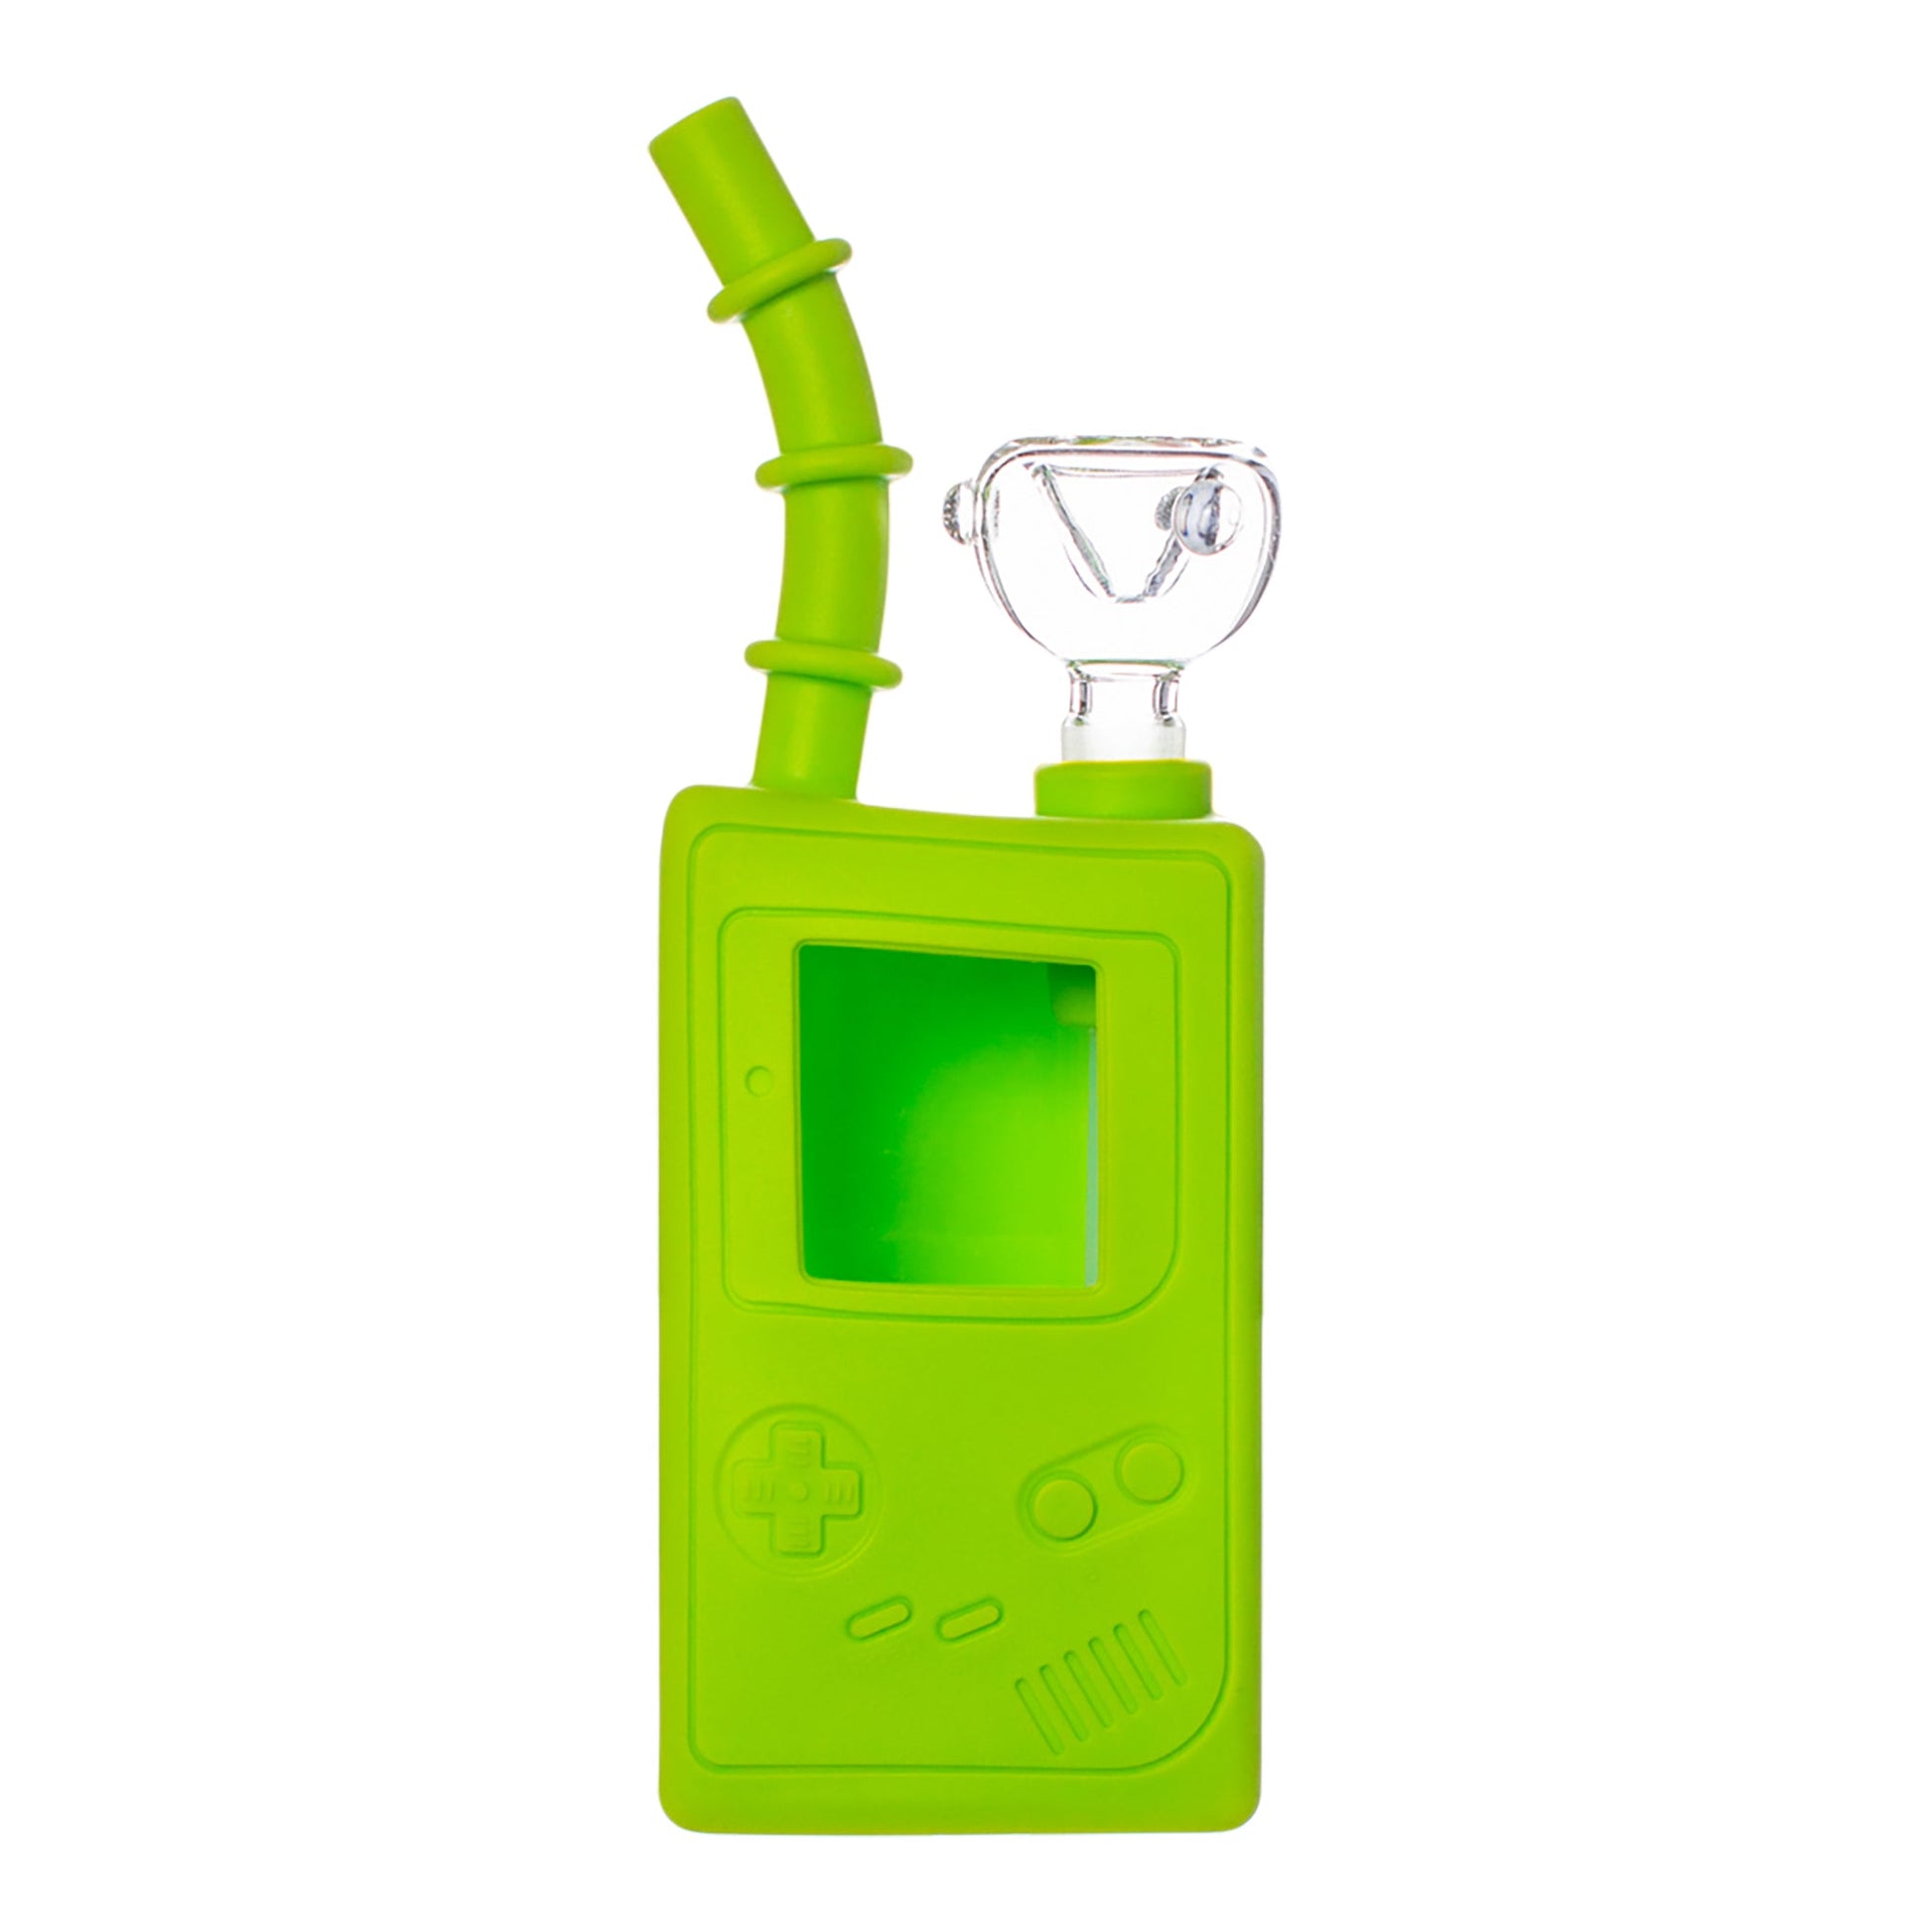 The Silicone GameBong - 7in Green